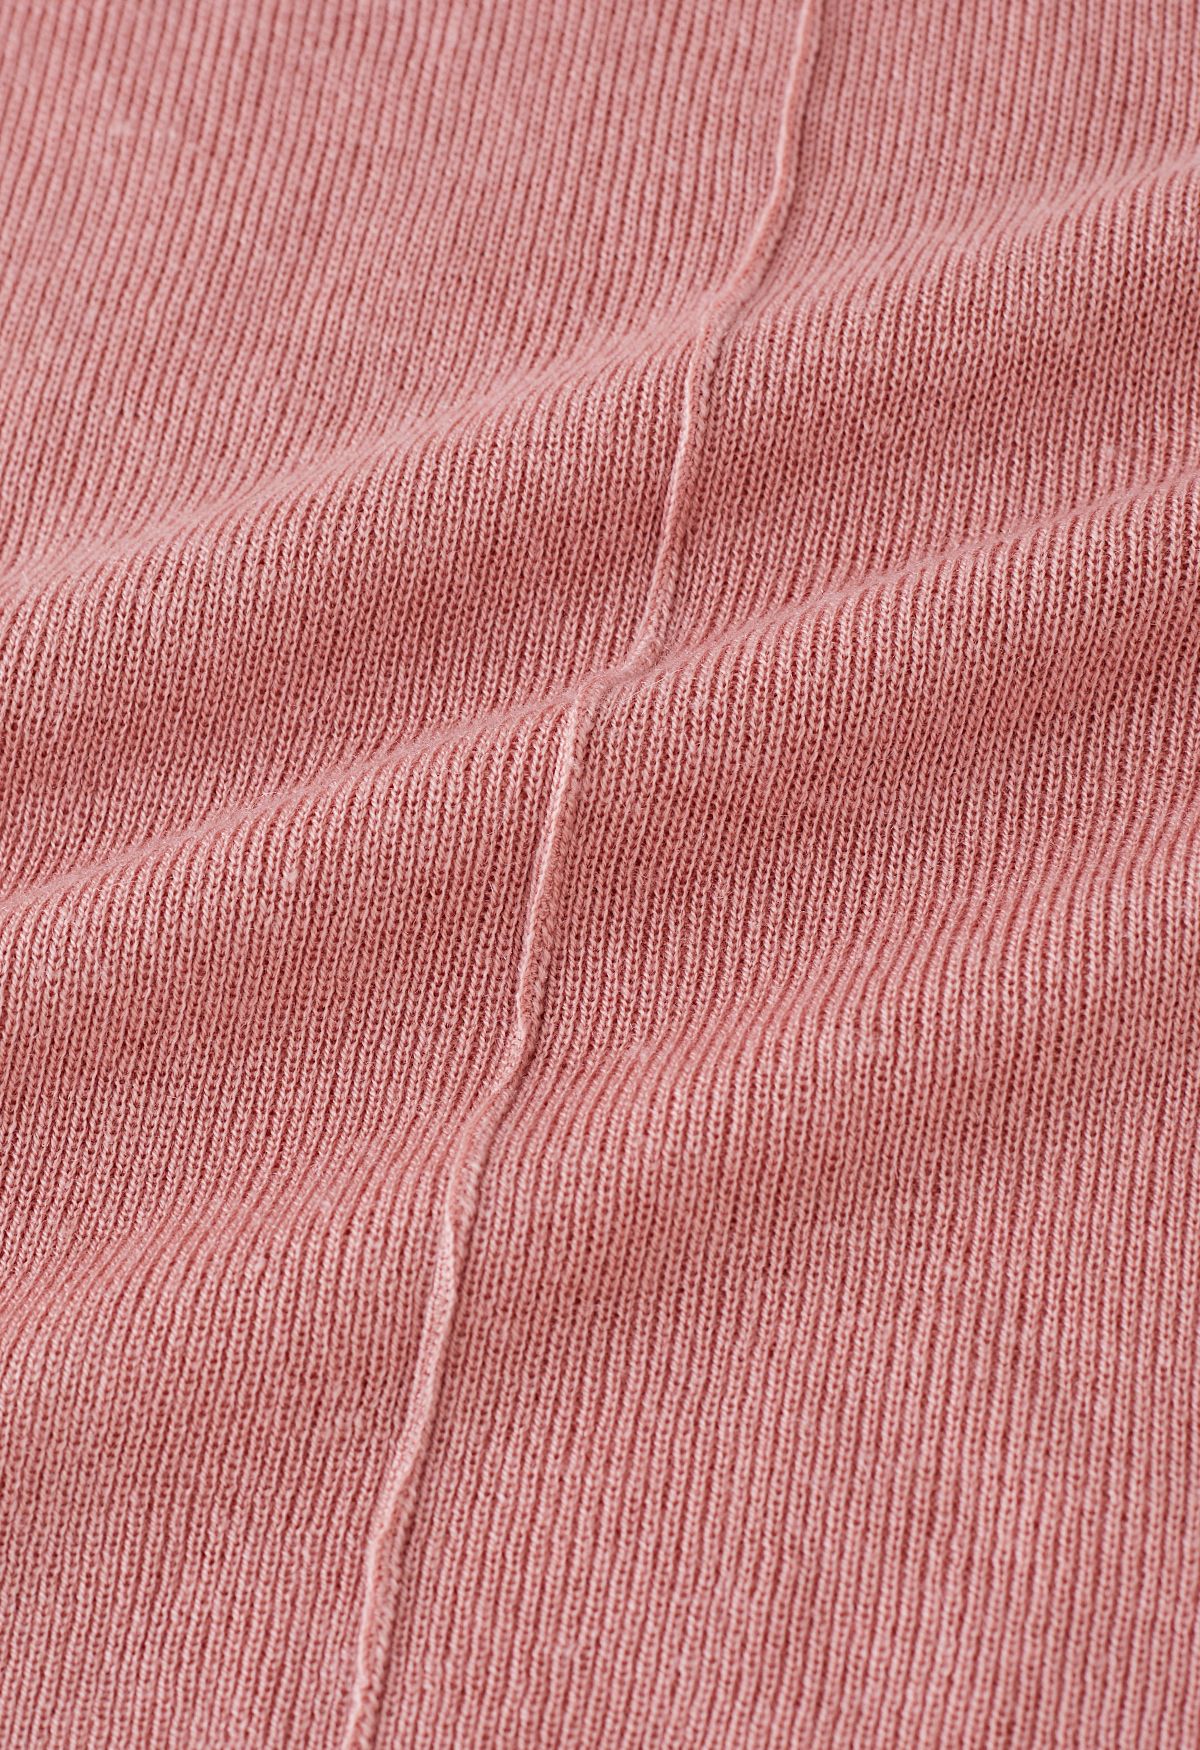 Turtleneck Two-Tone Fitted Knit Top in Pink